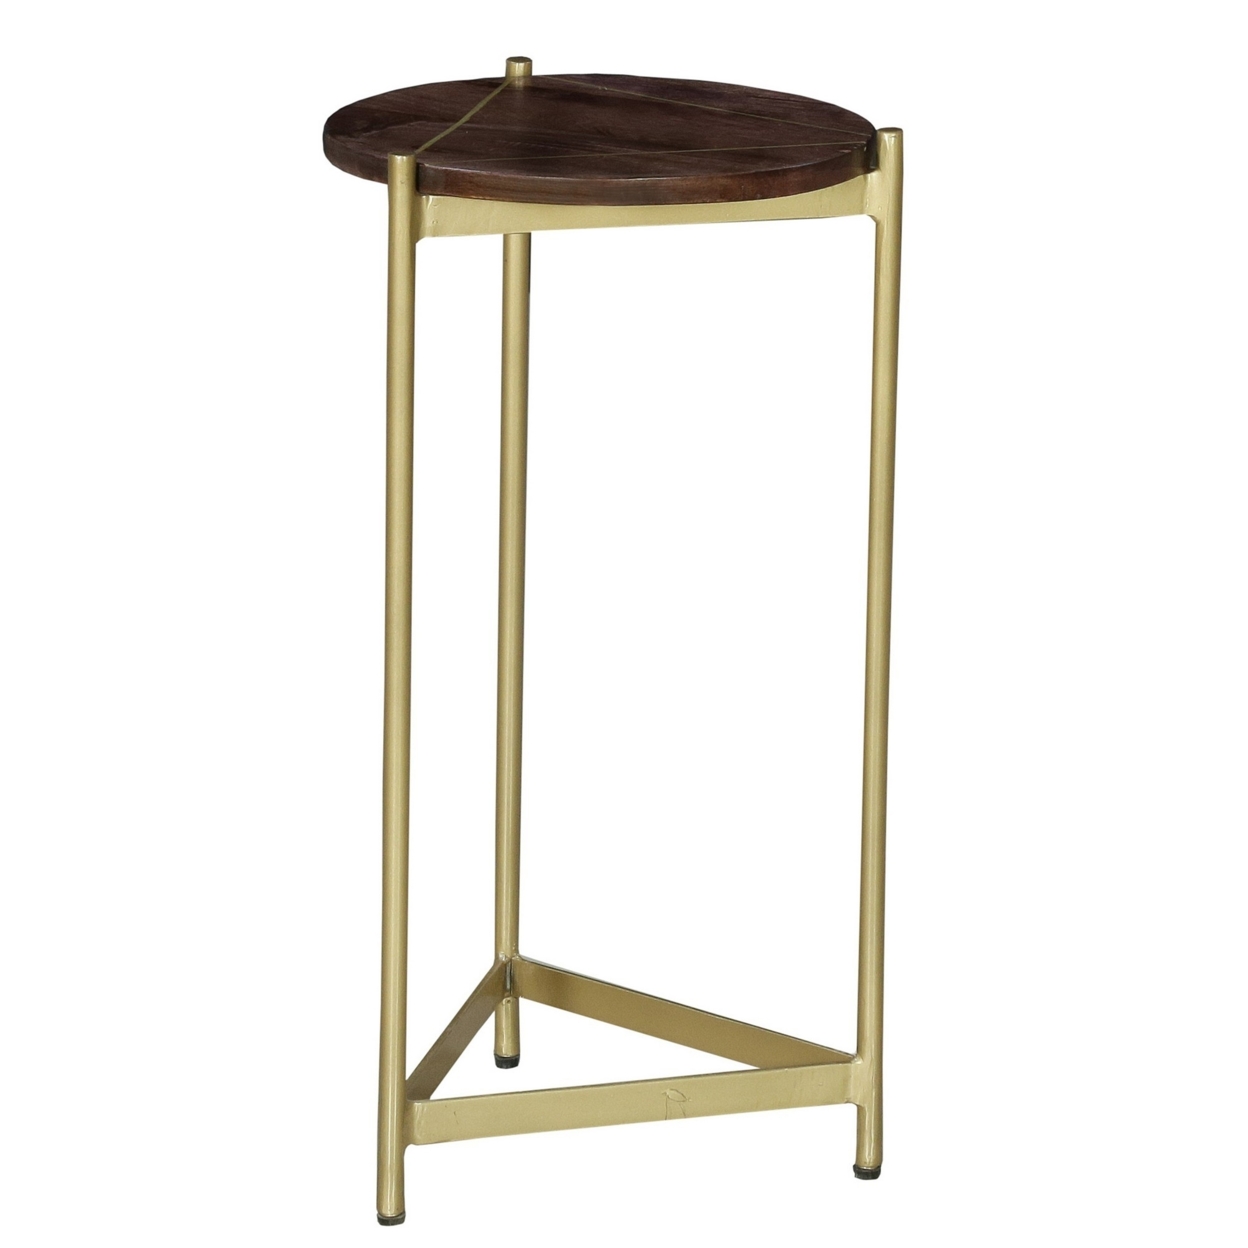 Corner Table With Round Wooden Top And Triangular Metal Base, Brown And Brass,Saltoro Sherpi